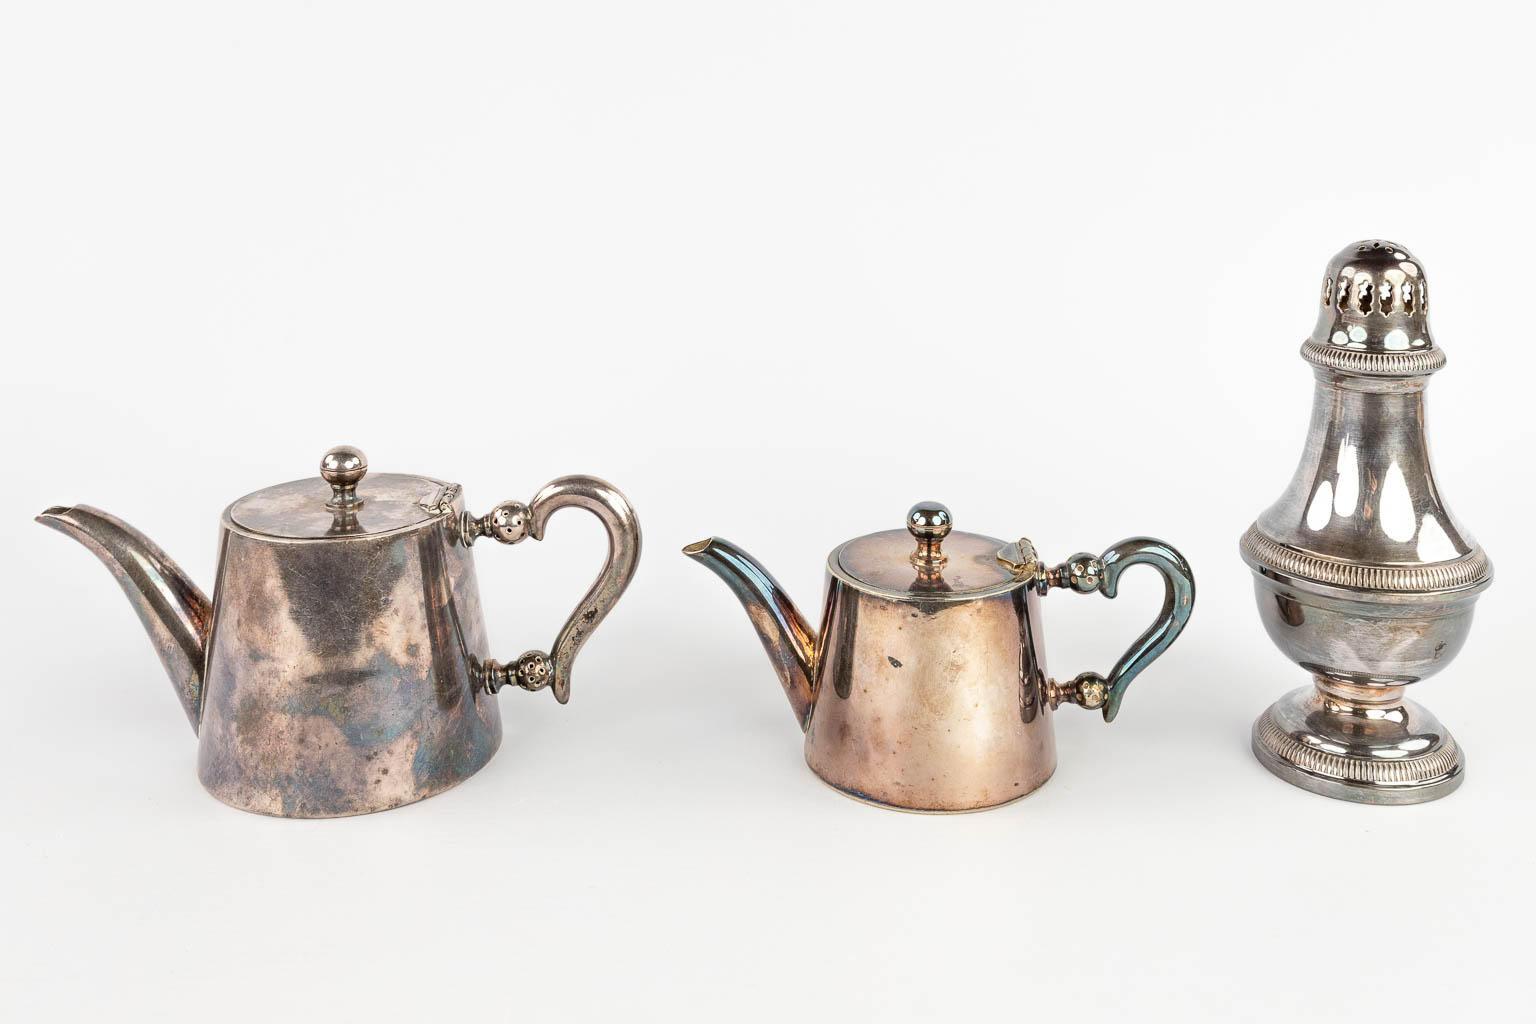 A set of table accessories and utensils, silver-plated metal. (H:8 x D:22 cm) - Image 12 of 23